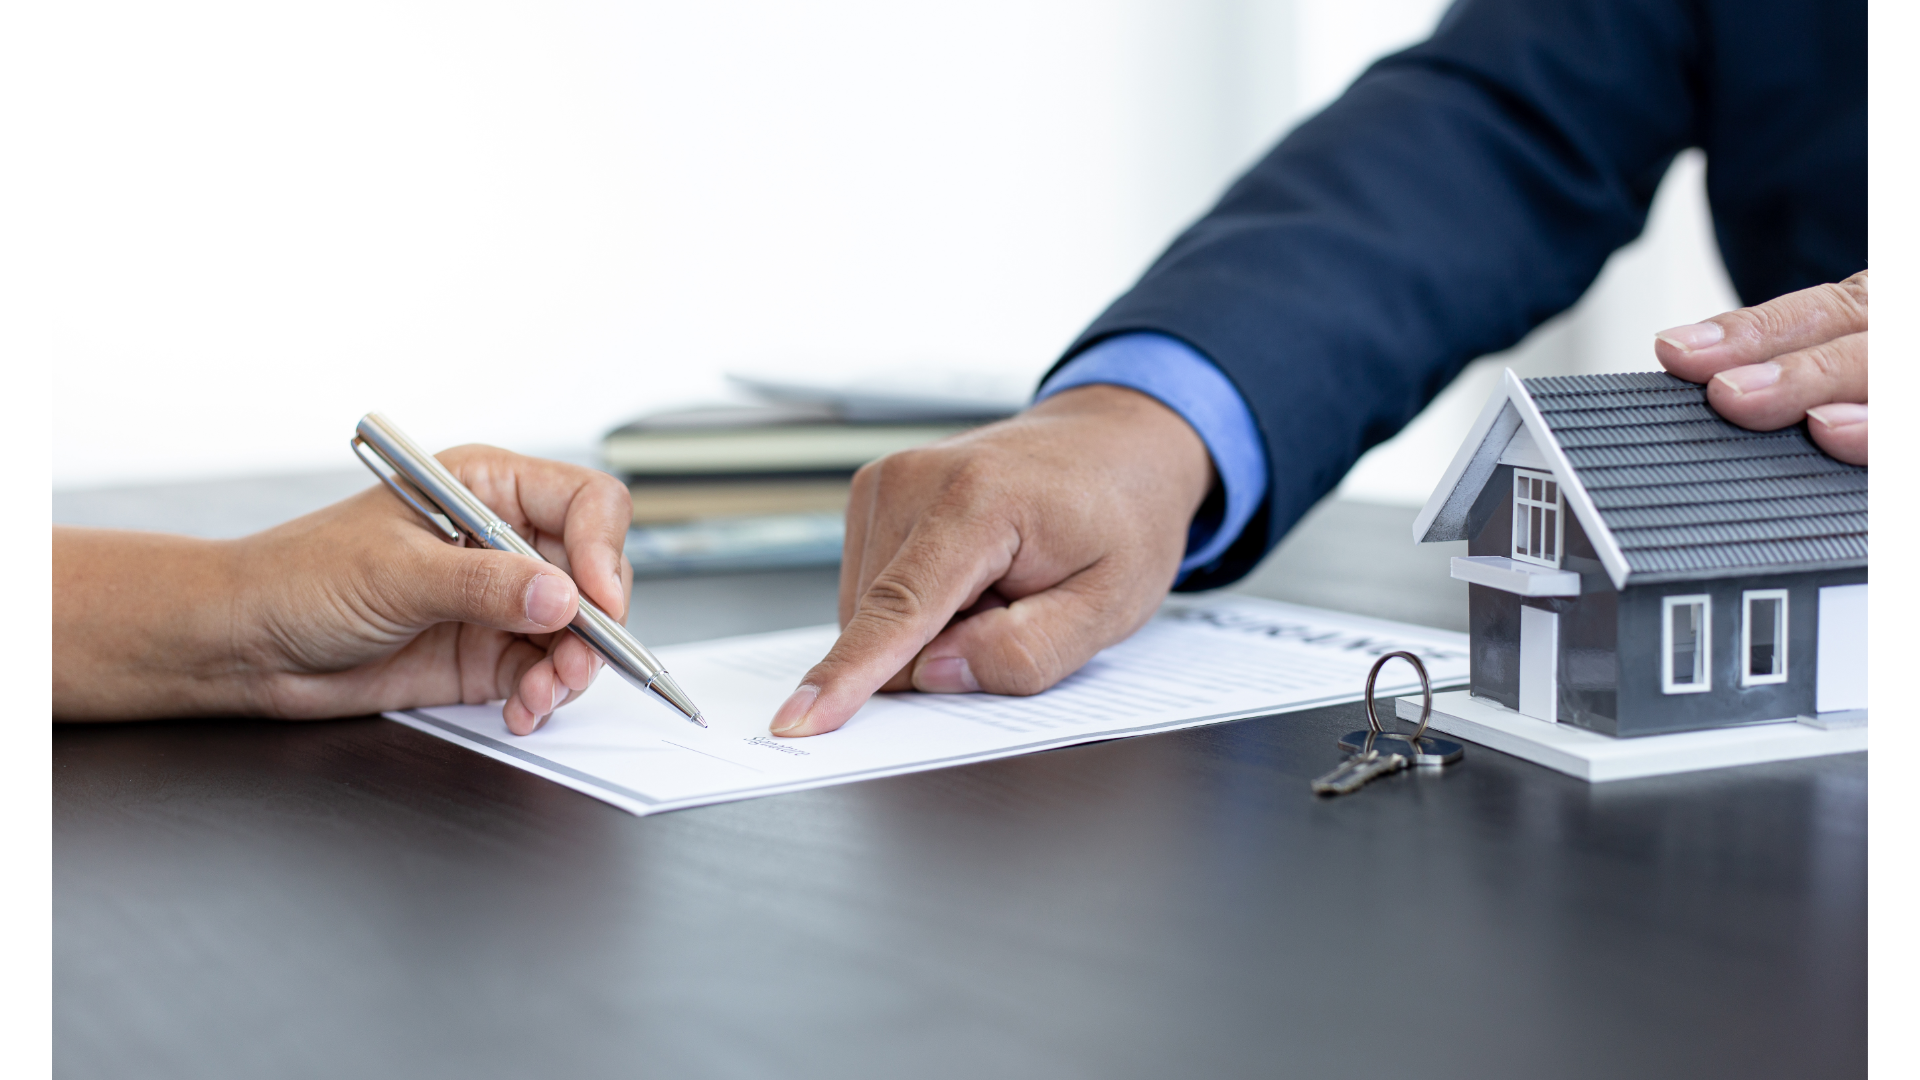 Two individuals at a table during a real estate transaction rwith one person pointing to a document, likely a contract, for the other to sign, with a small model